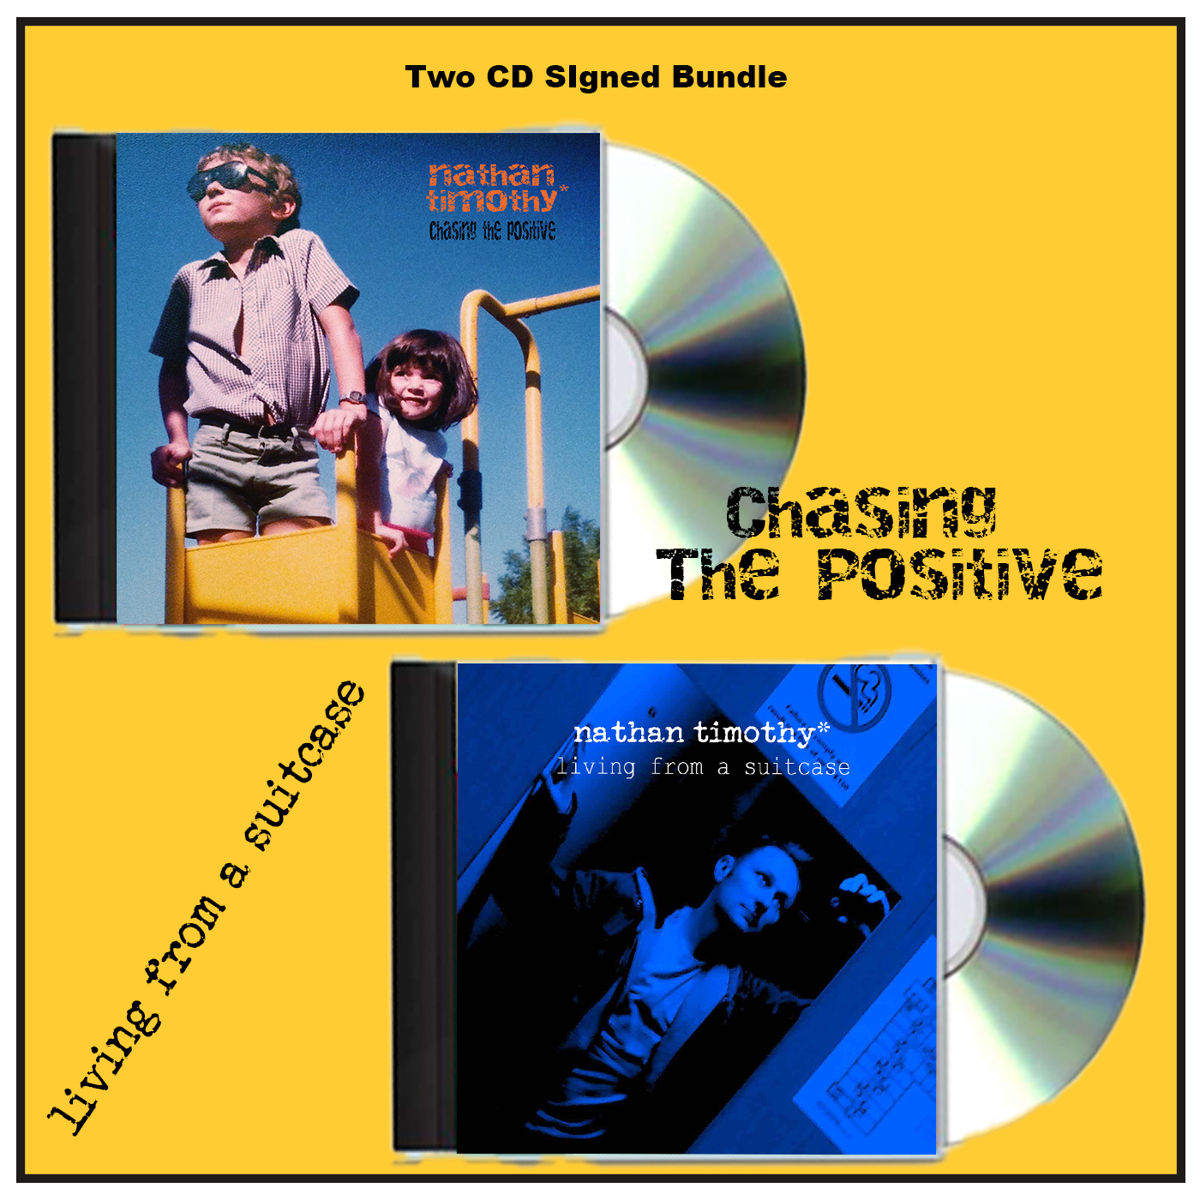 2CD's ***SIGNED****Chasing The Positive (CD) AND Living From A Suitcase (CD) Signed Bundle - nathan timothy*